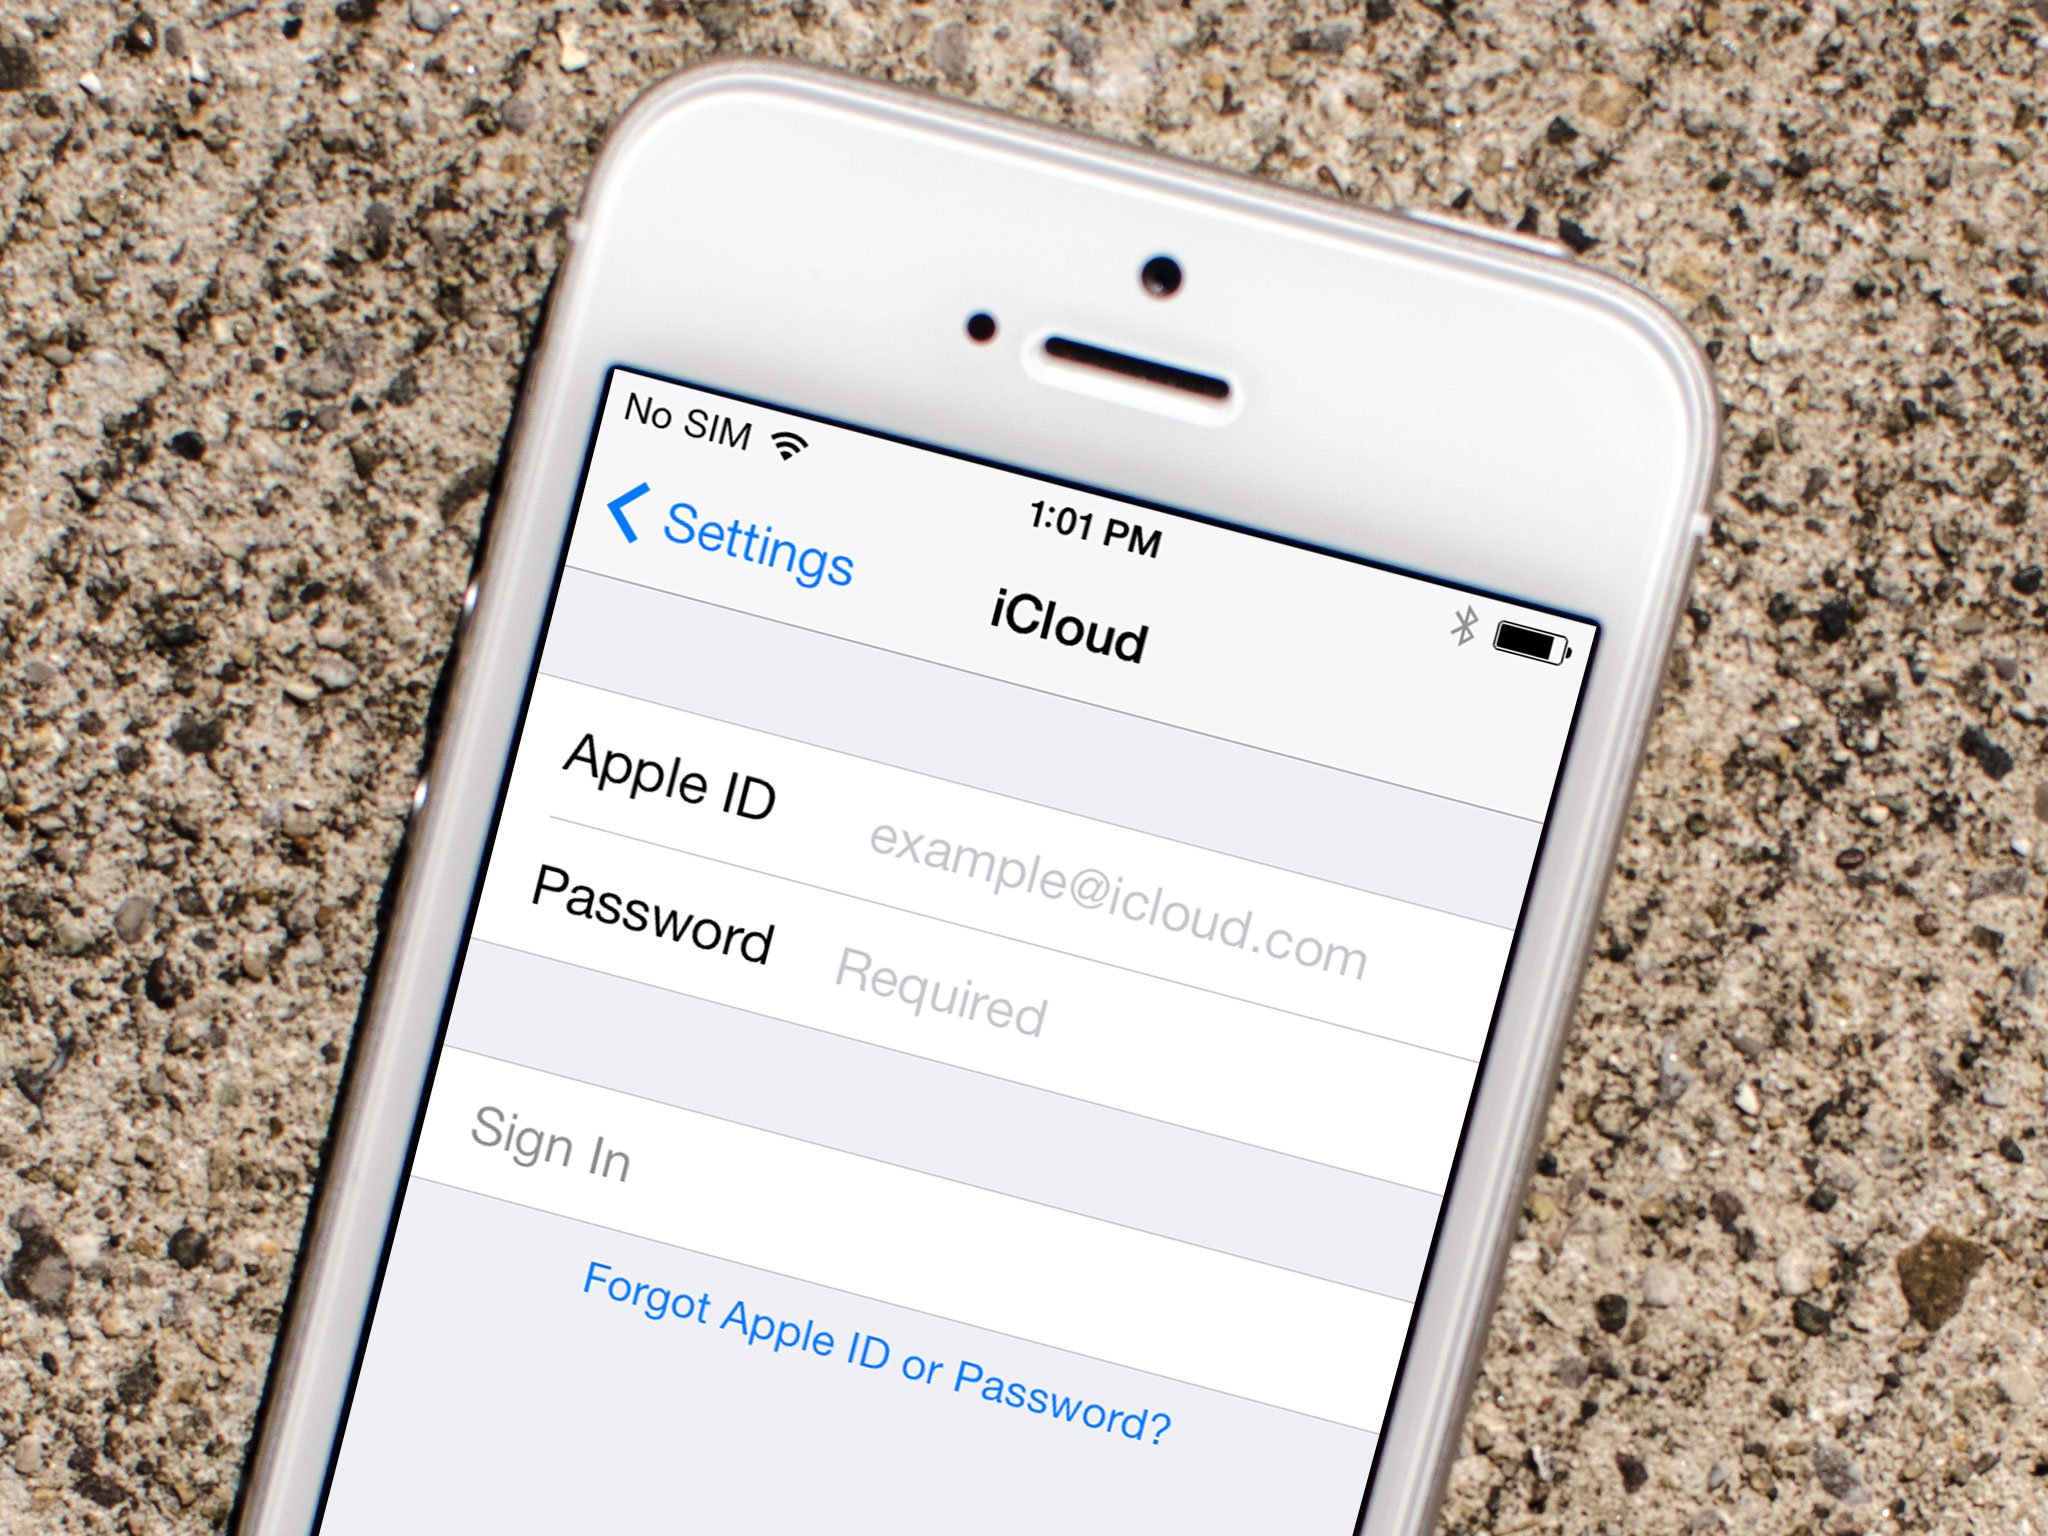 The Ultimate Guide to Apple ID: Everything You Need to Know